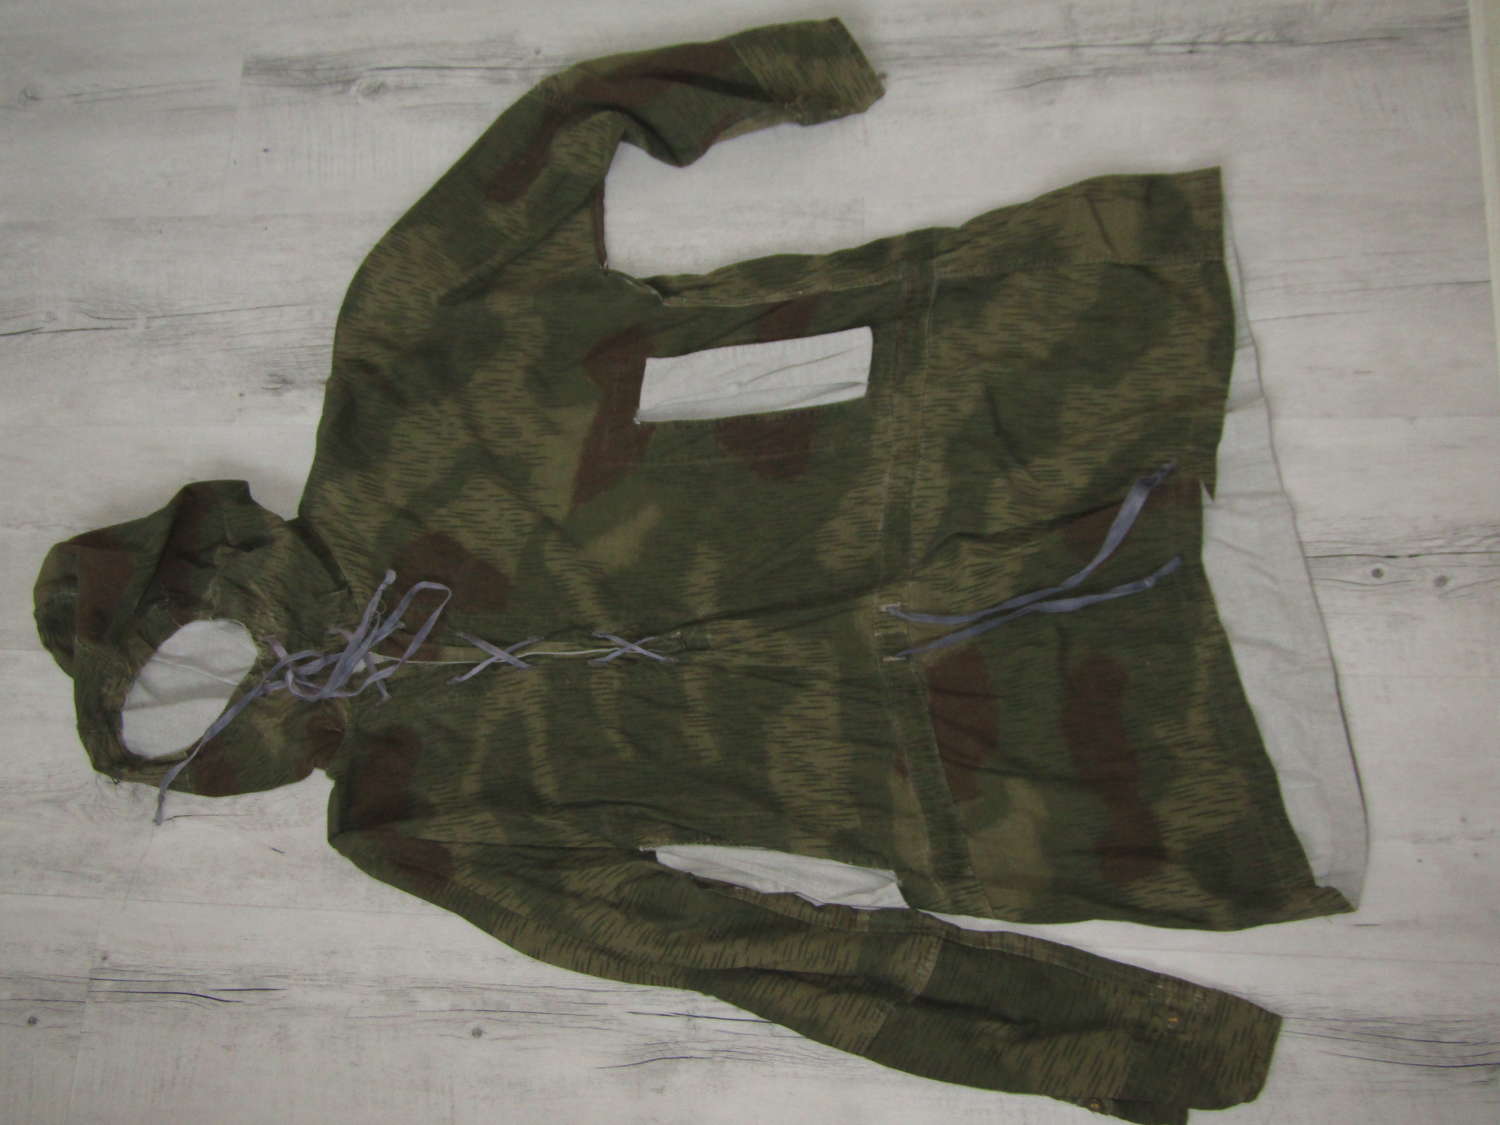 WH sniper smock and helmet cover 